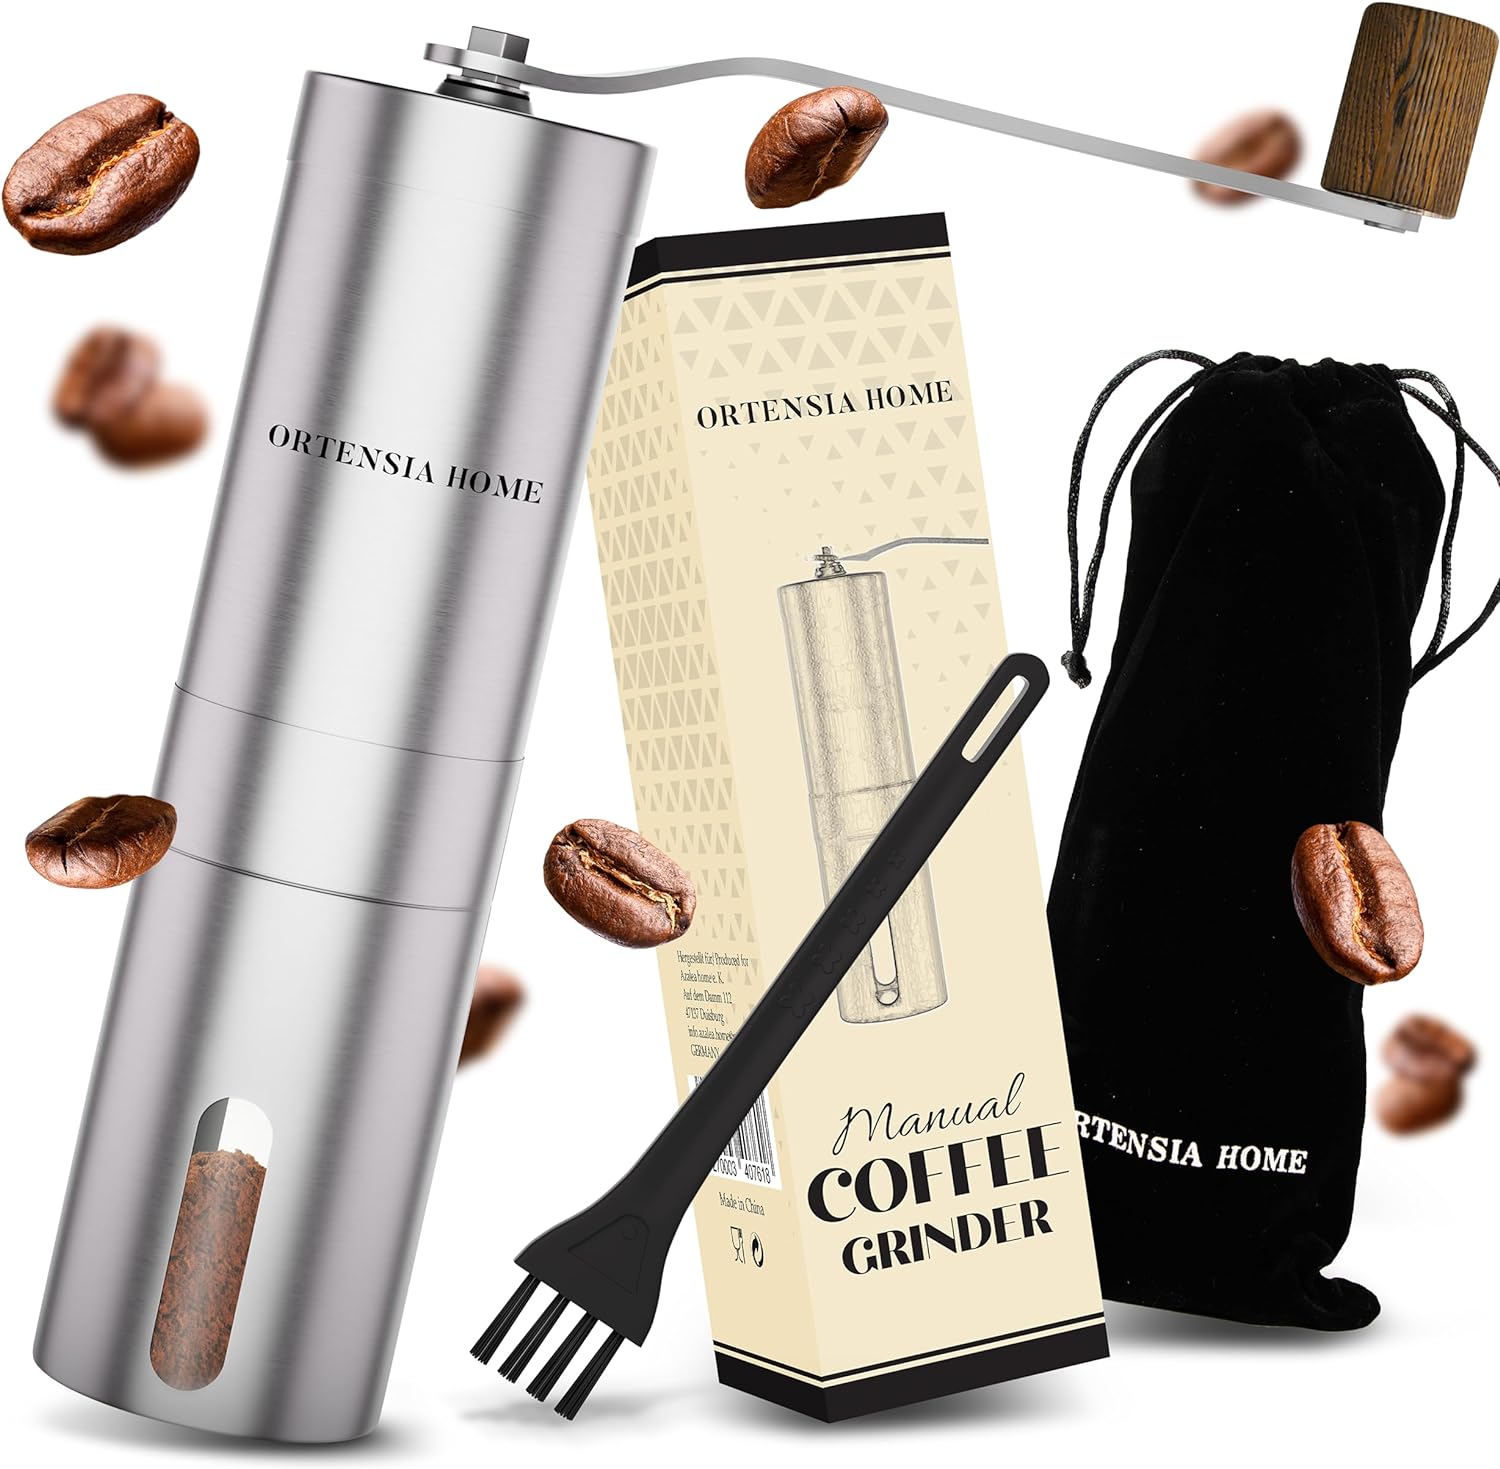 ortensia home Manual Coffee Grinder with Adjustable Ceramic Cone Grinder Made of 304 Stainless Steel Indoor and Outdoor Manual Coffee Grinder with Cone Grinder Manual Coffee Grinder
